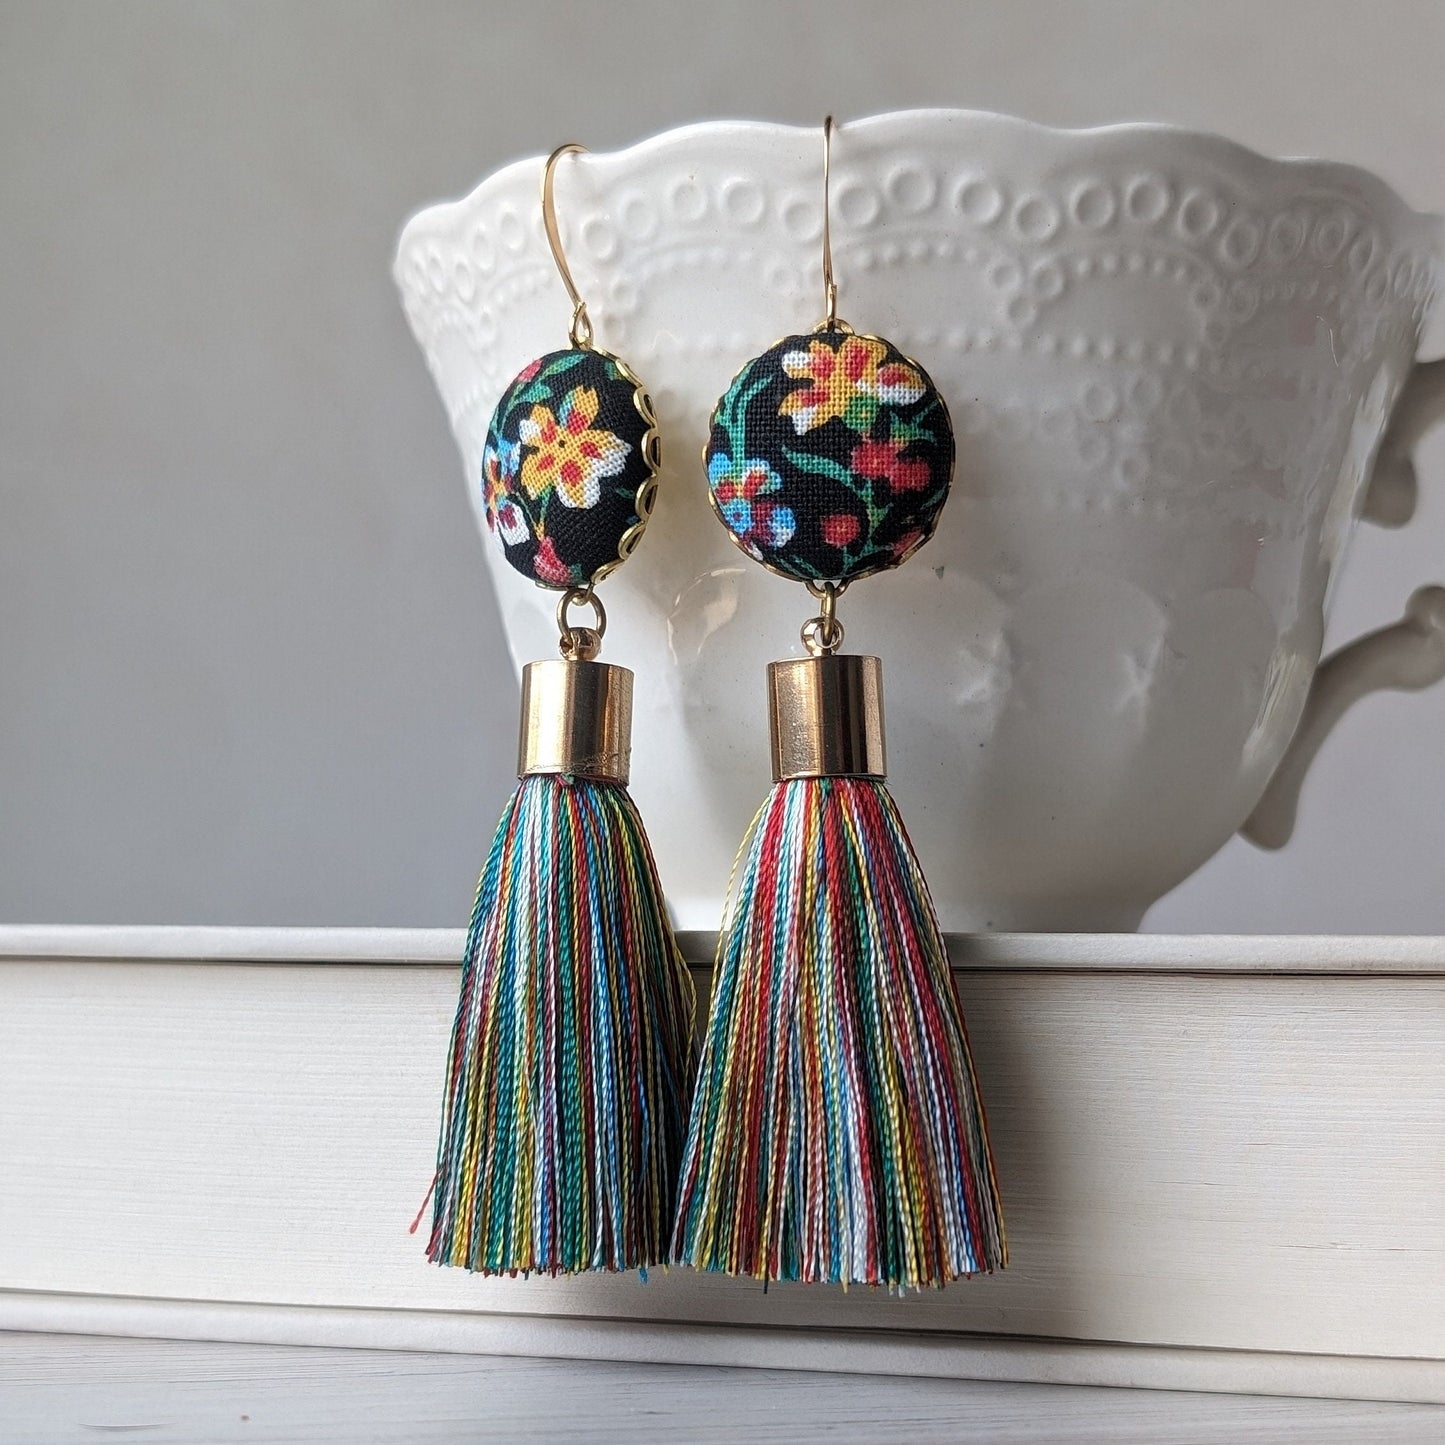 Colorful Funky Earrings Handmade With Vintage Floral Fabric, Primary Color Tassels